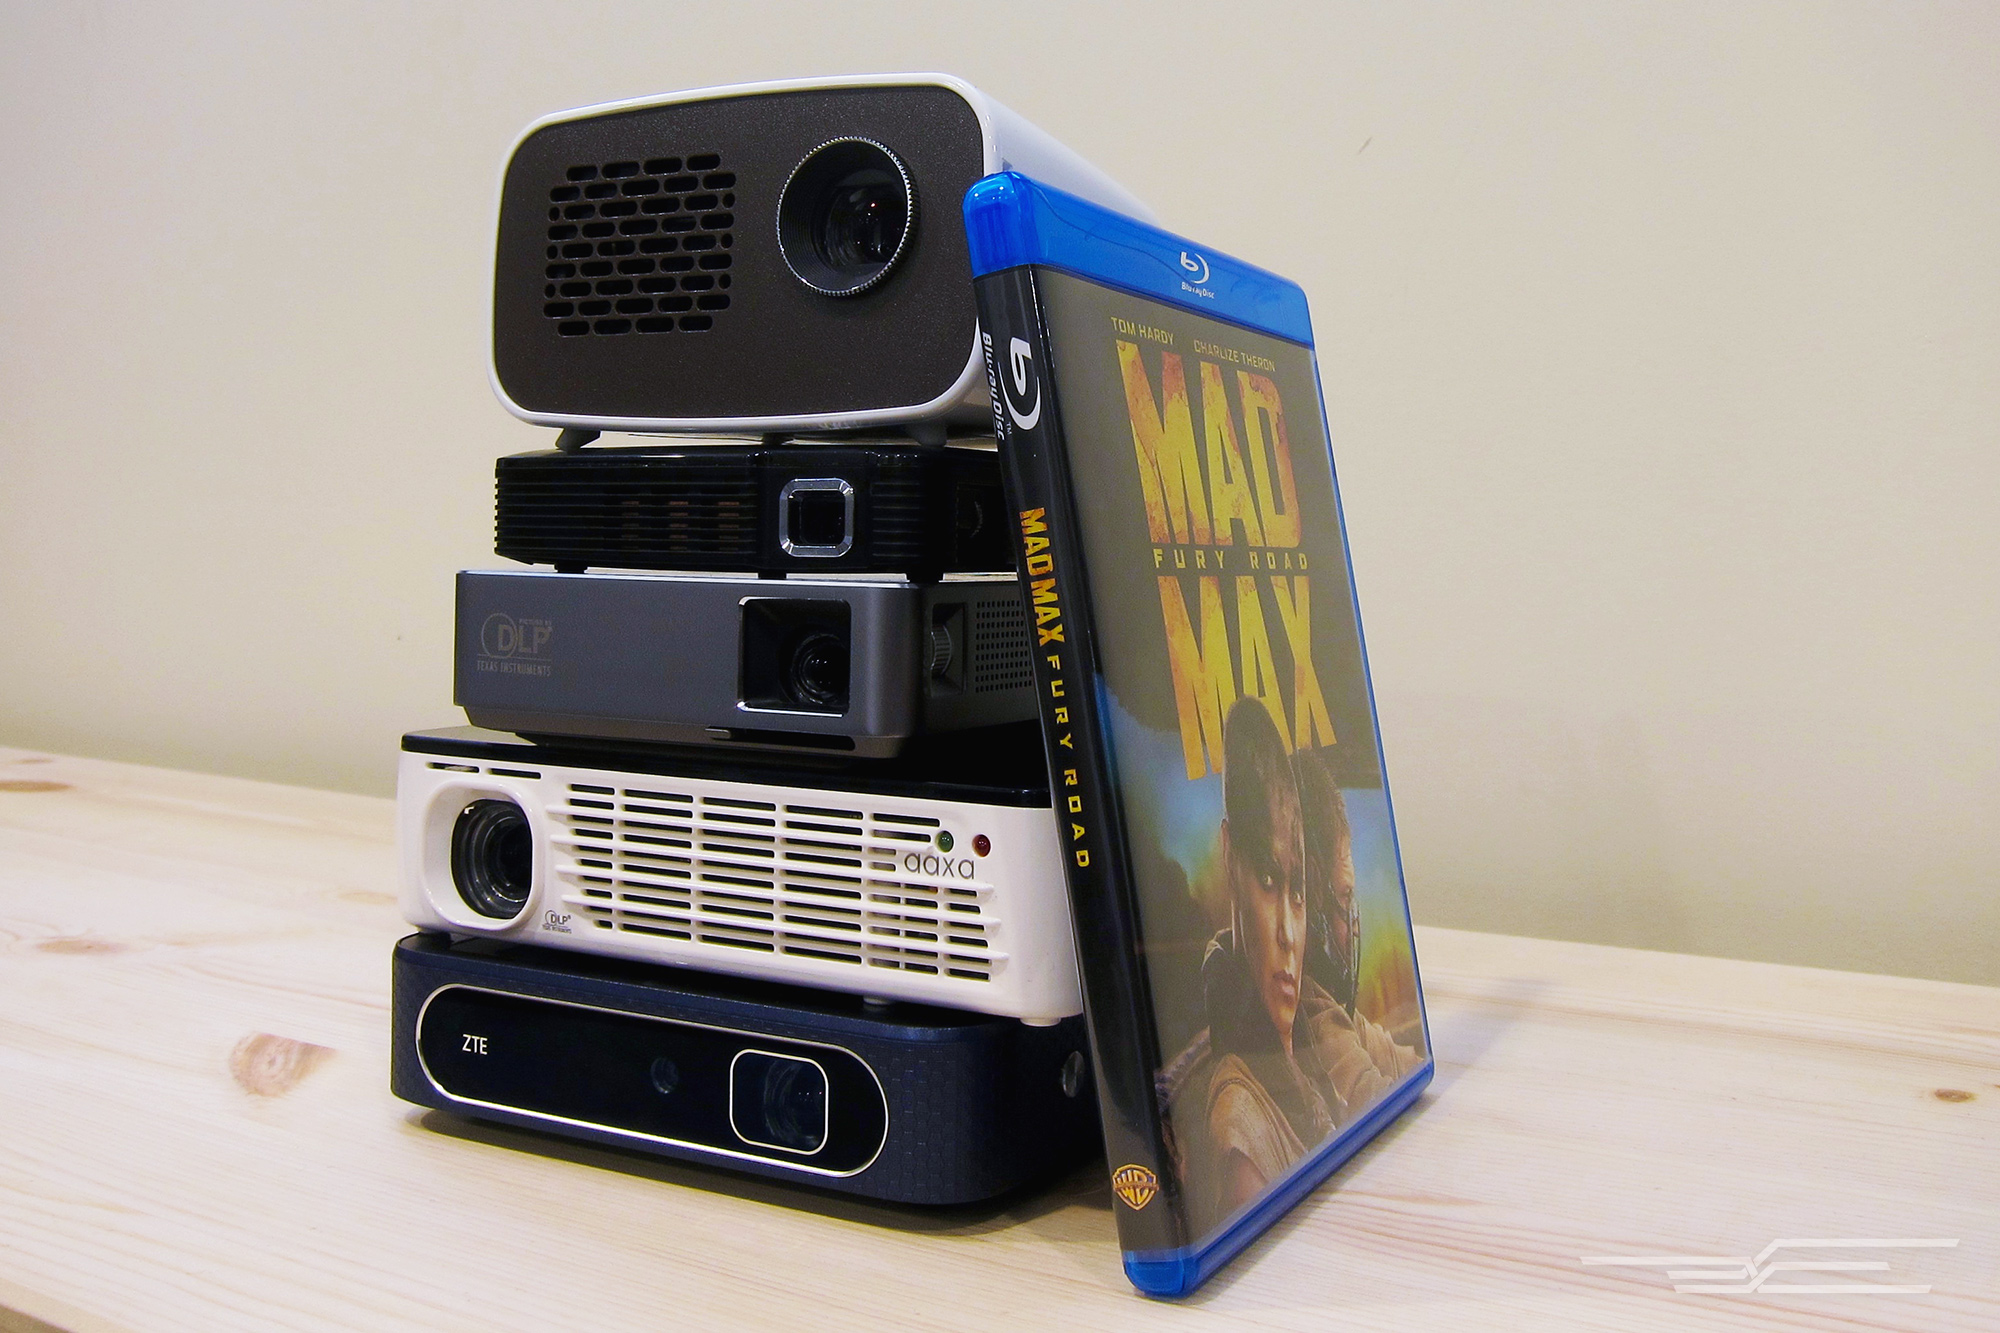 The Best Pico Projector